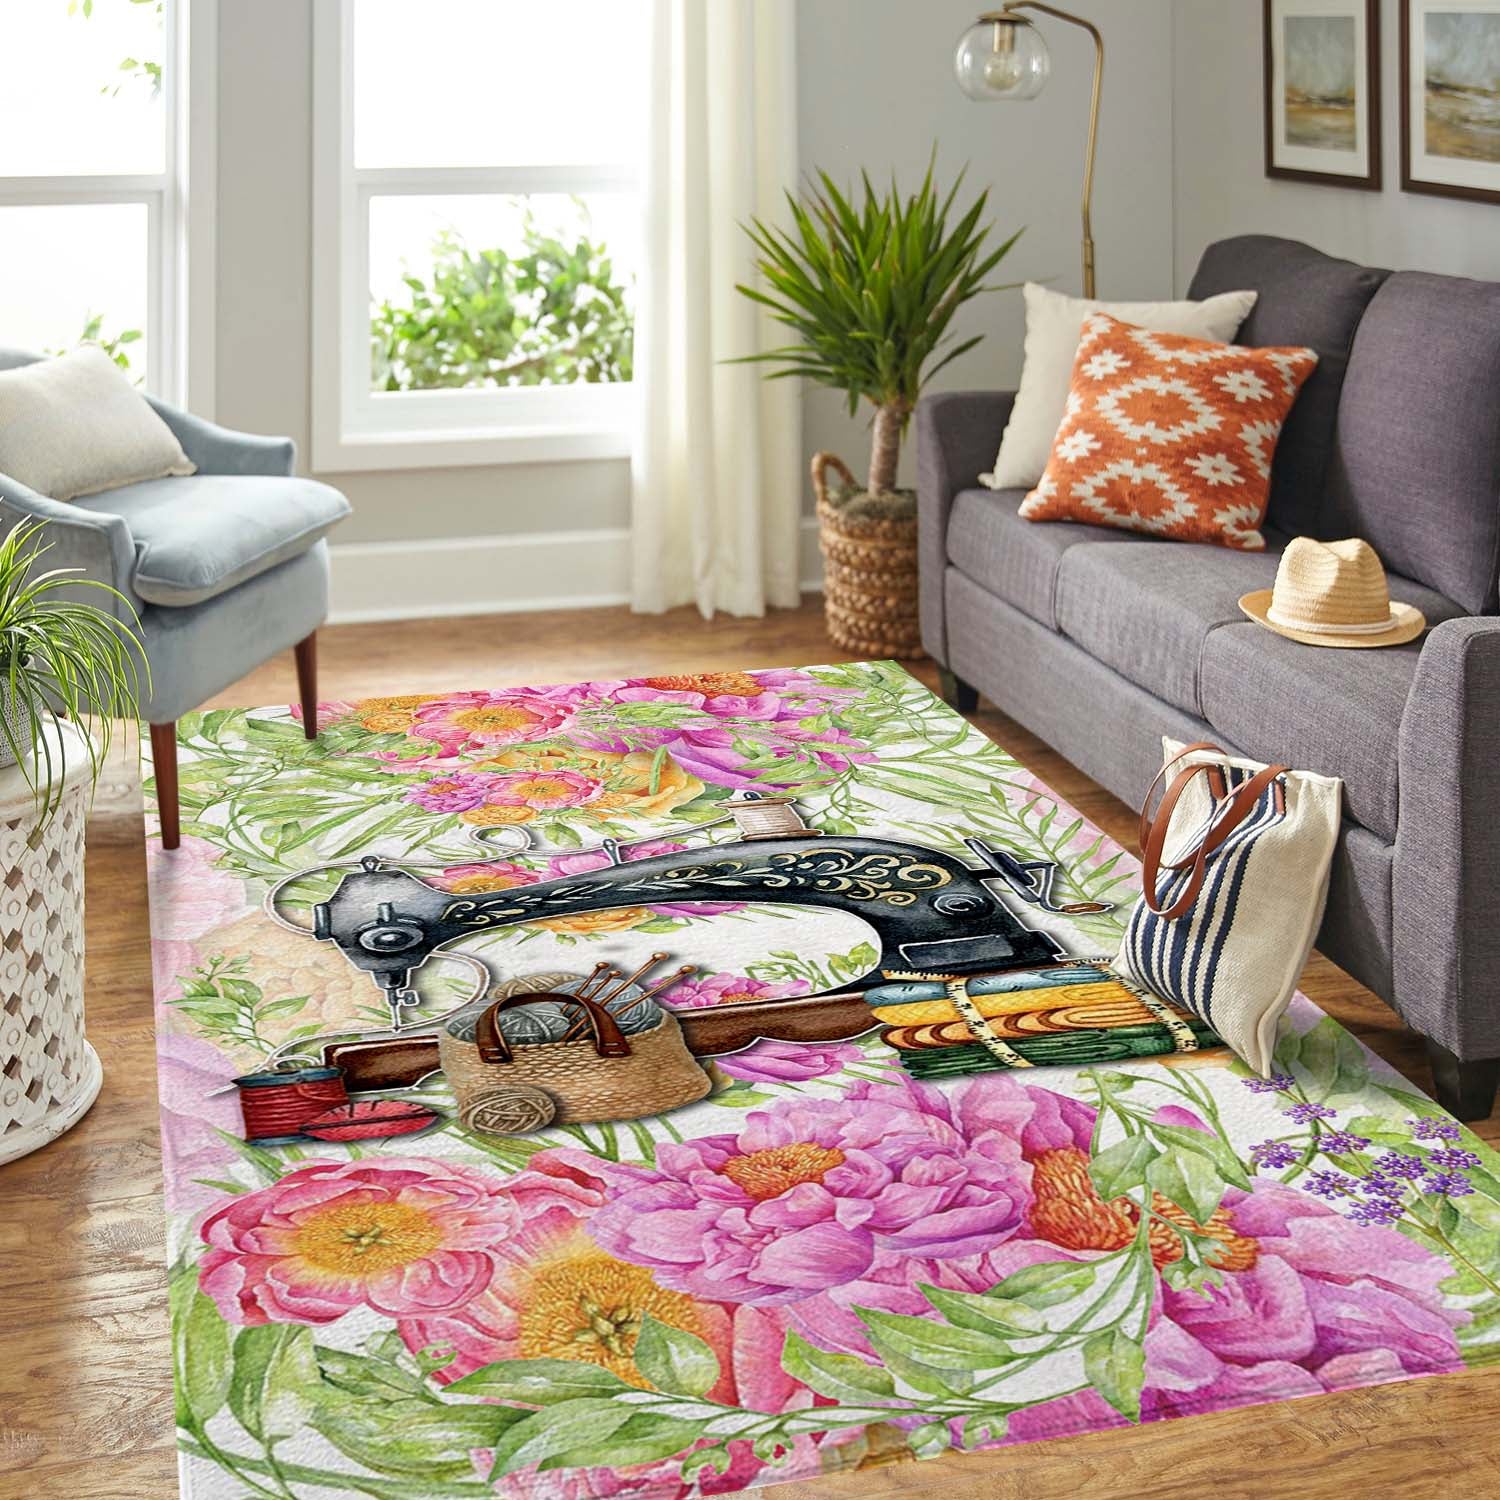 Sewing Quilting Flower Area Rug 07414